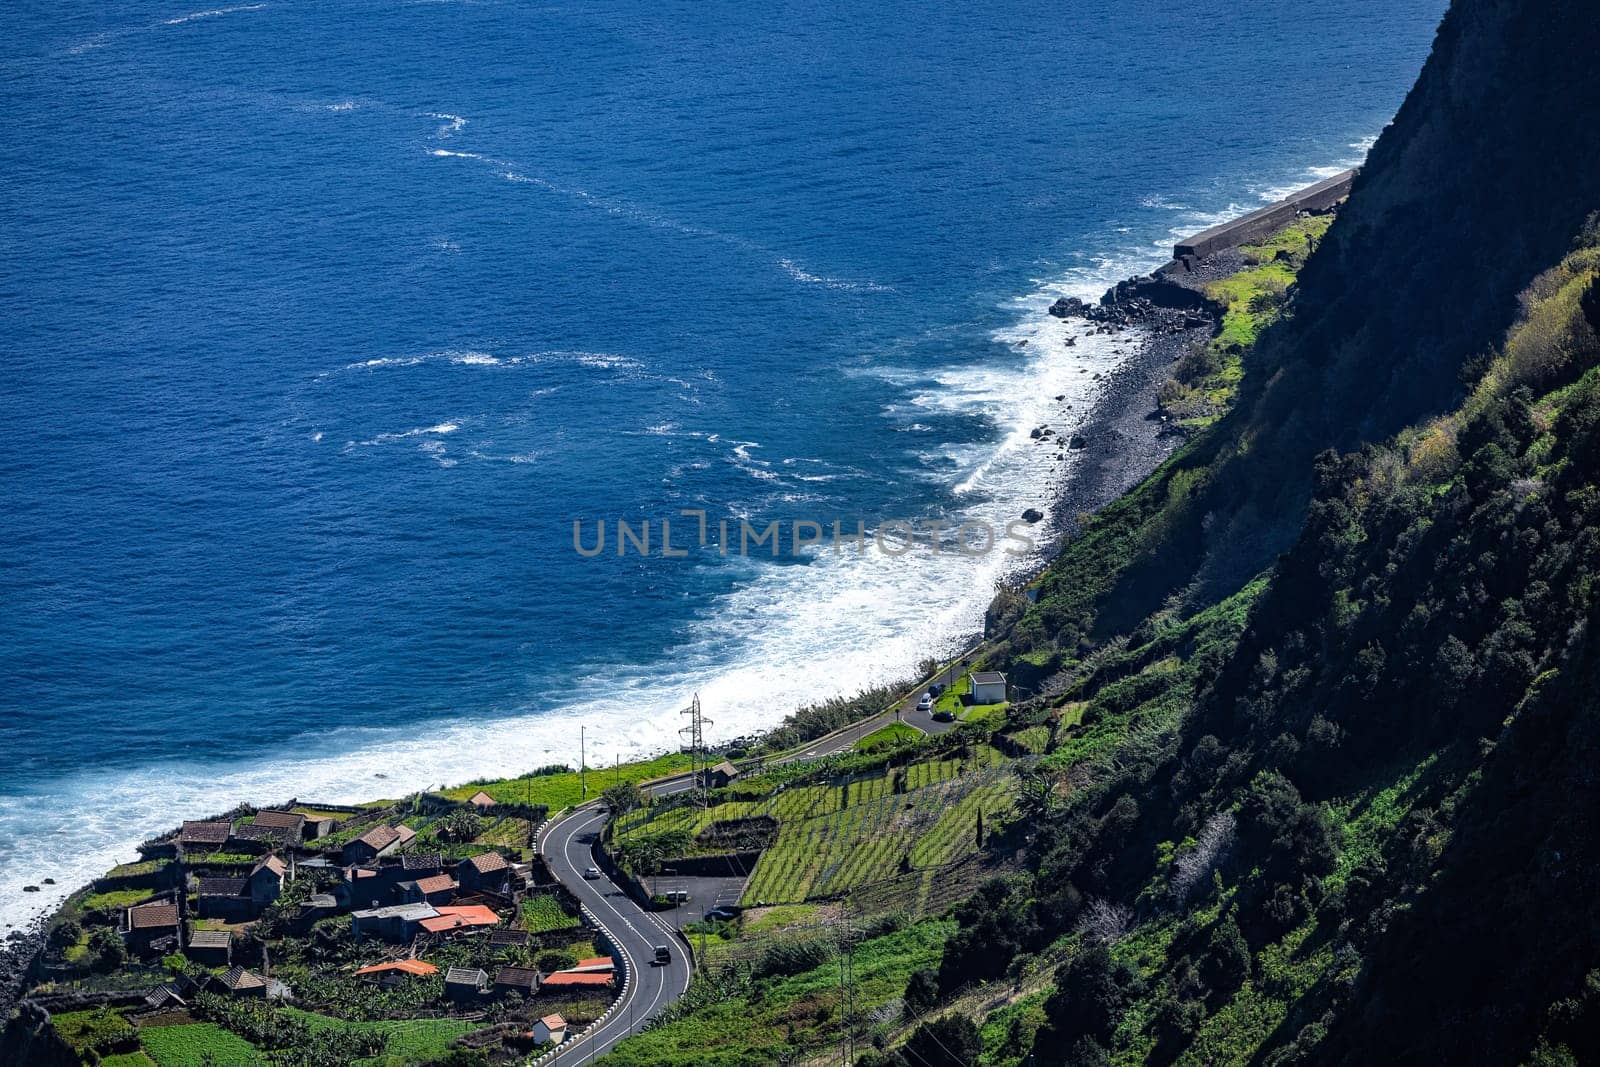 A scenic view of a winding road along a steep cliffside overlooking the ocean